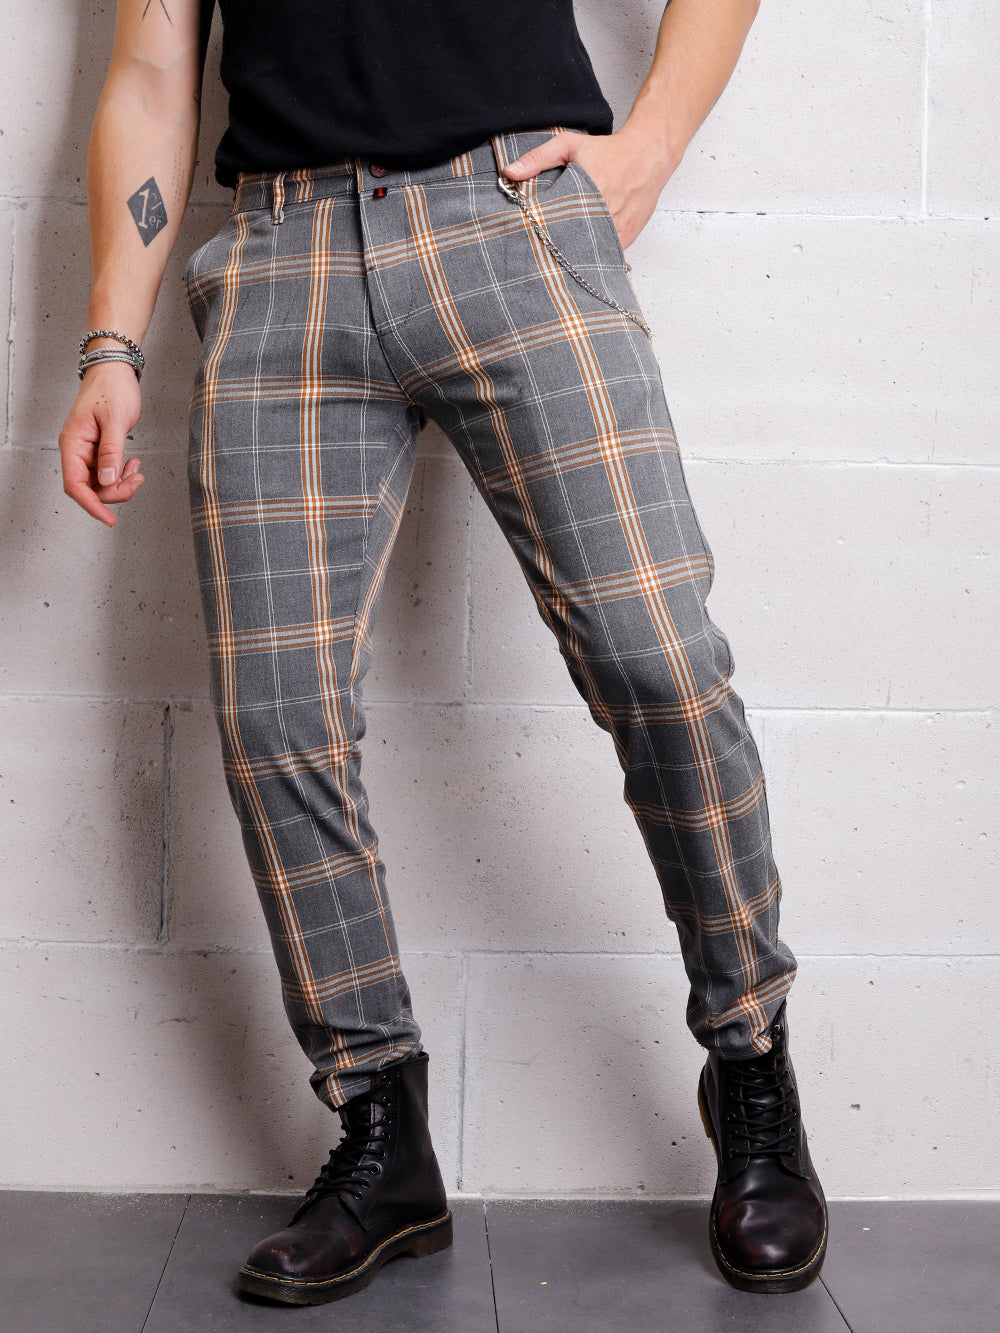 A man in slim-fit, CHECKERED STONE trouser pants leaning against a wall.